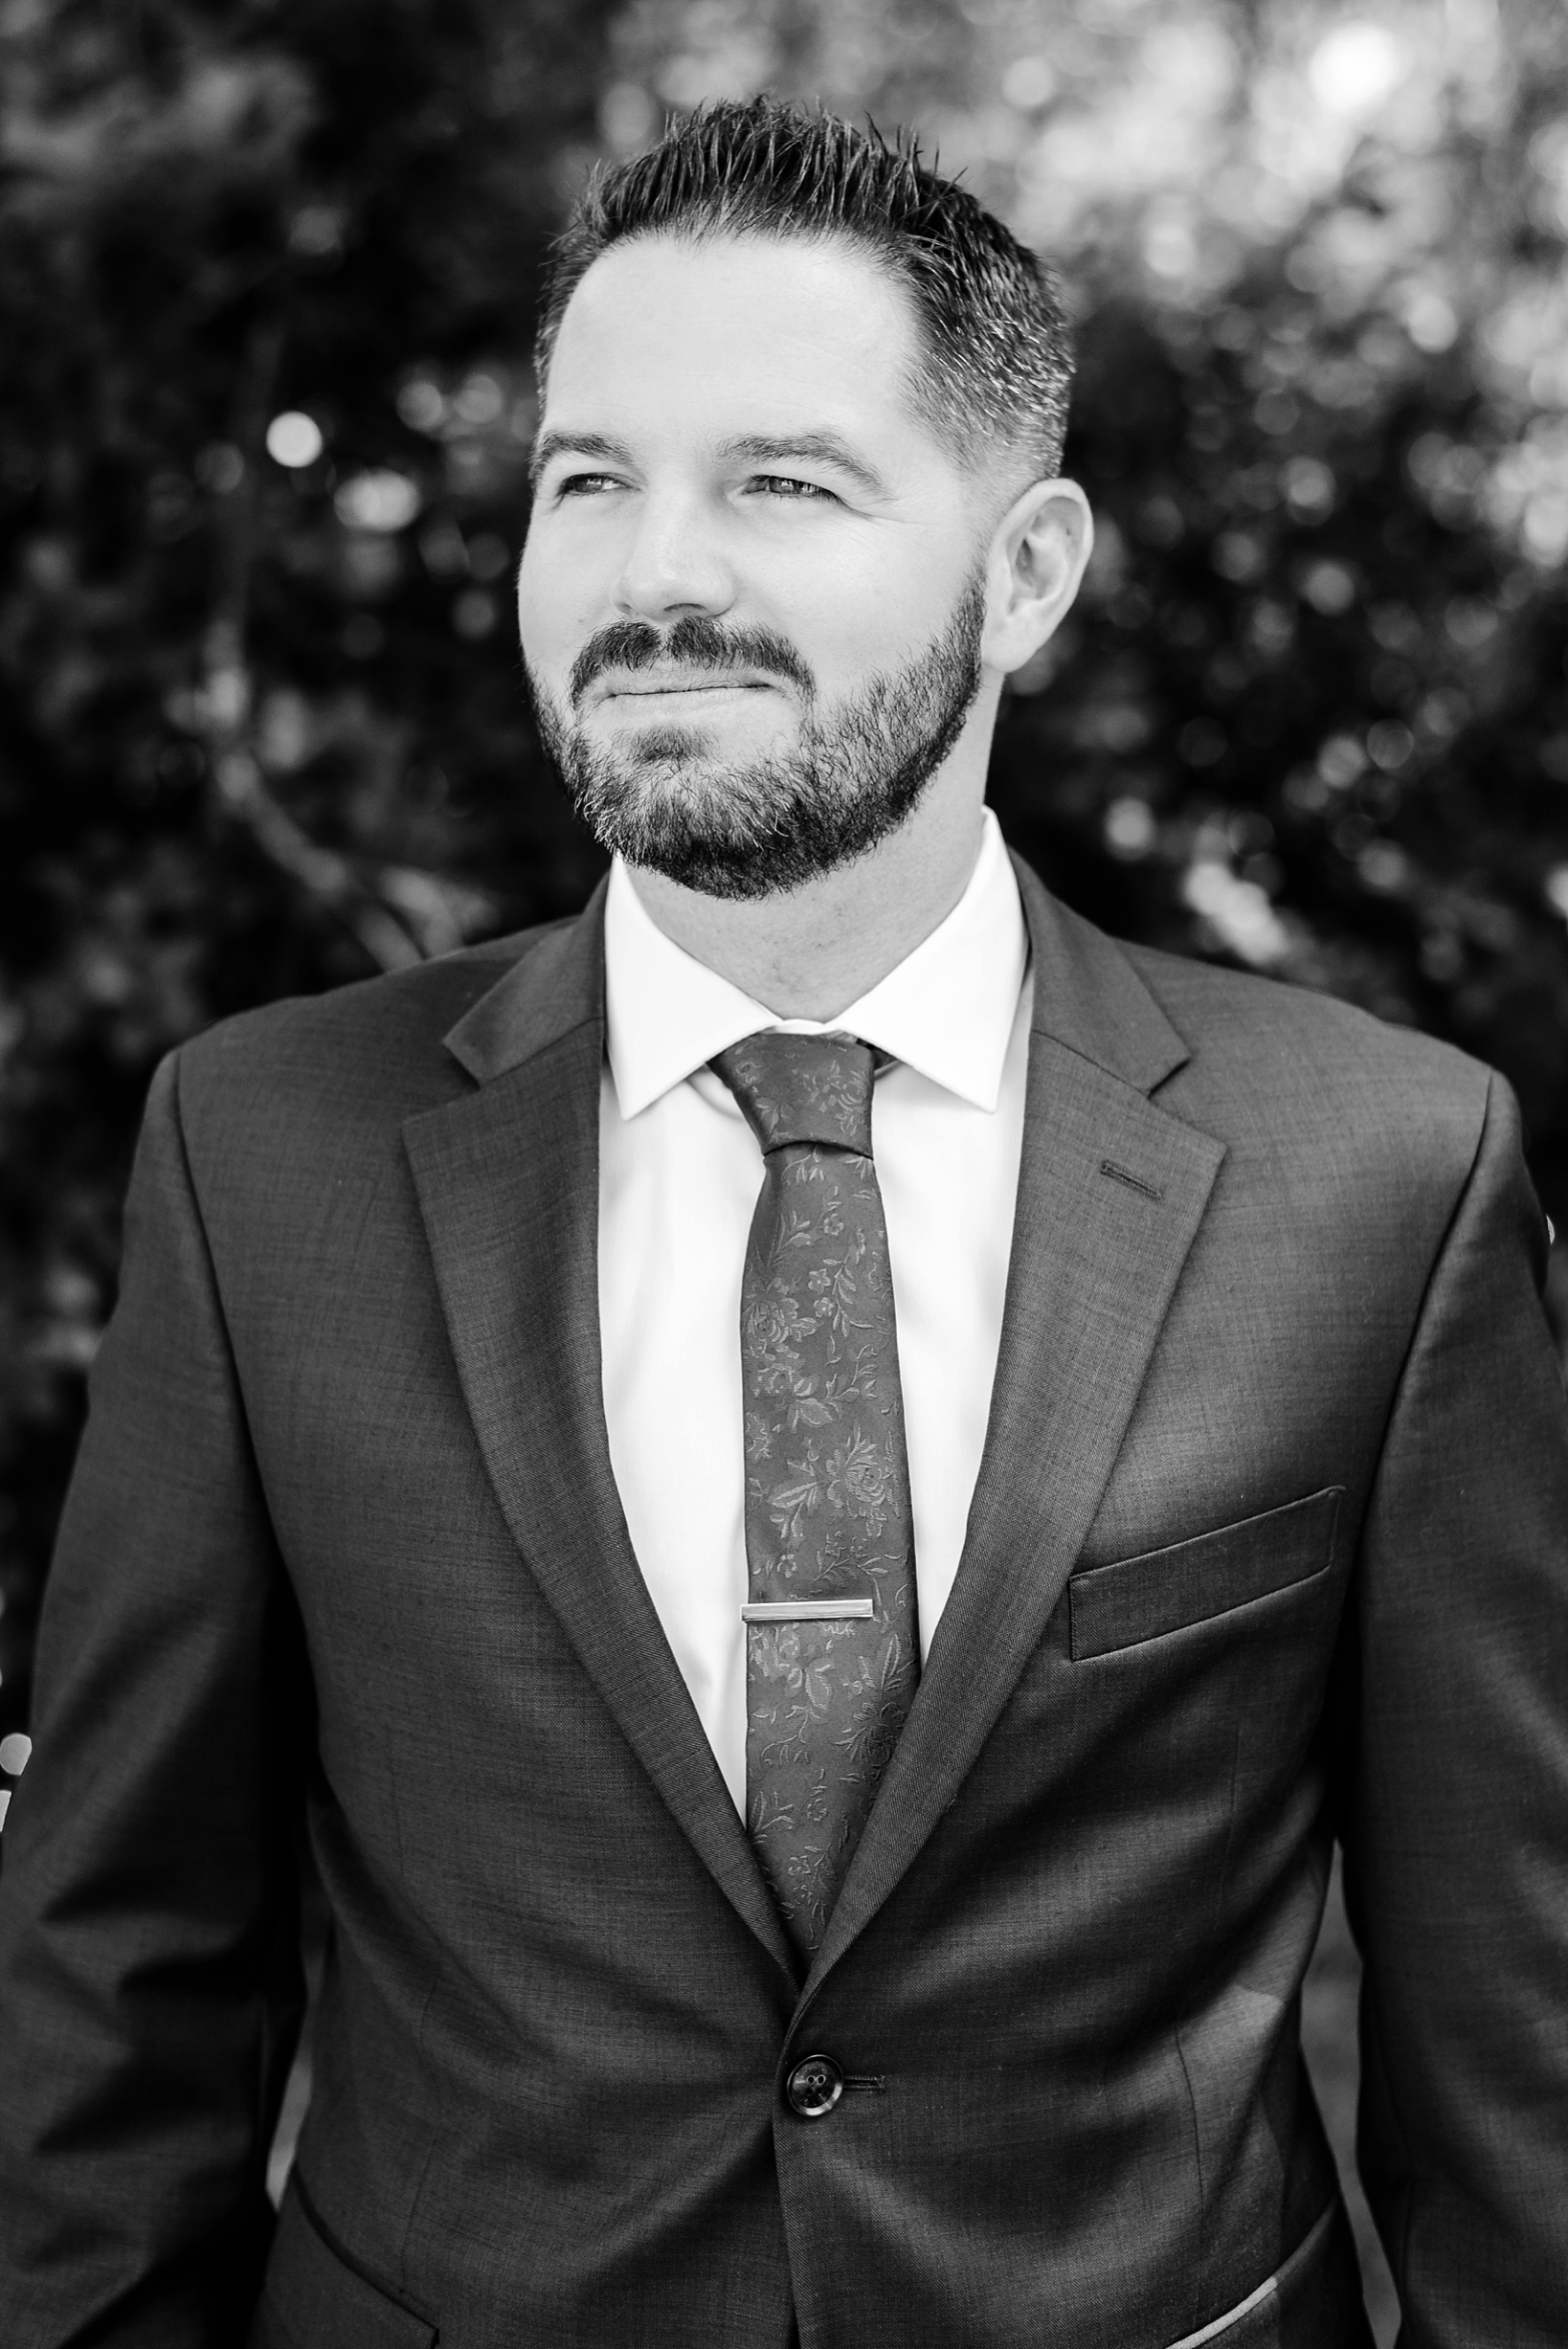 Classic portrait of the groom in black and white by Sarah & Ben Photography located in Tampa, FL